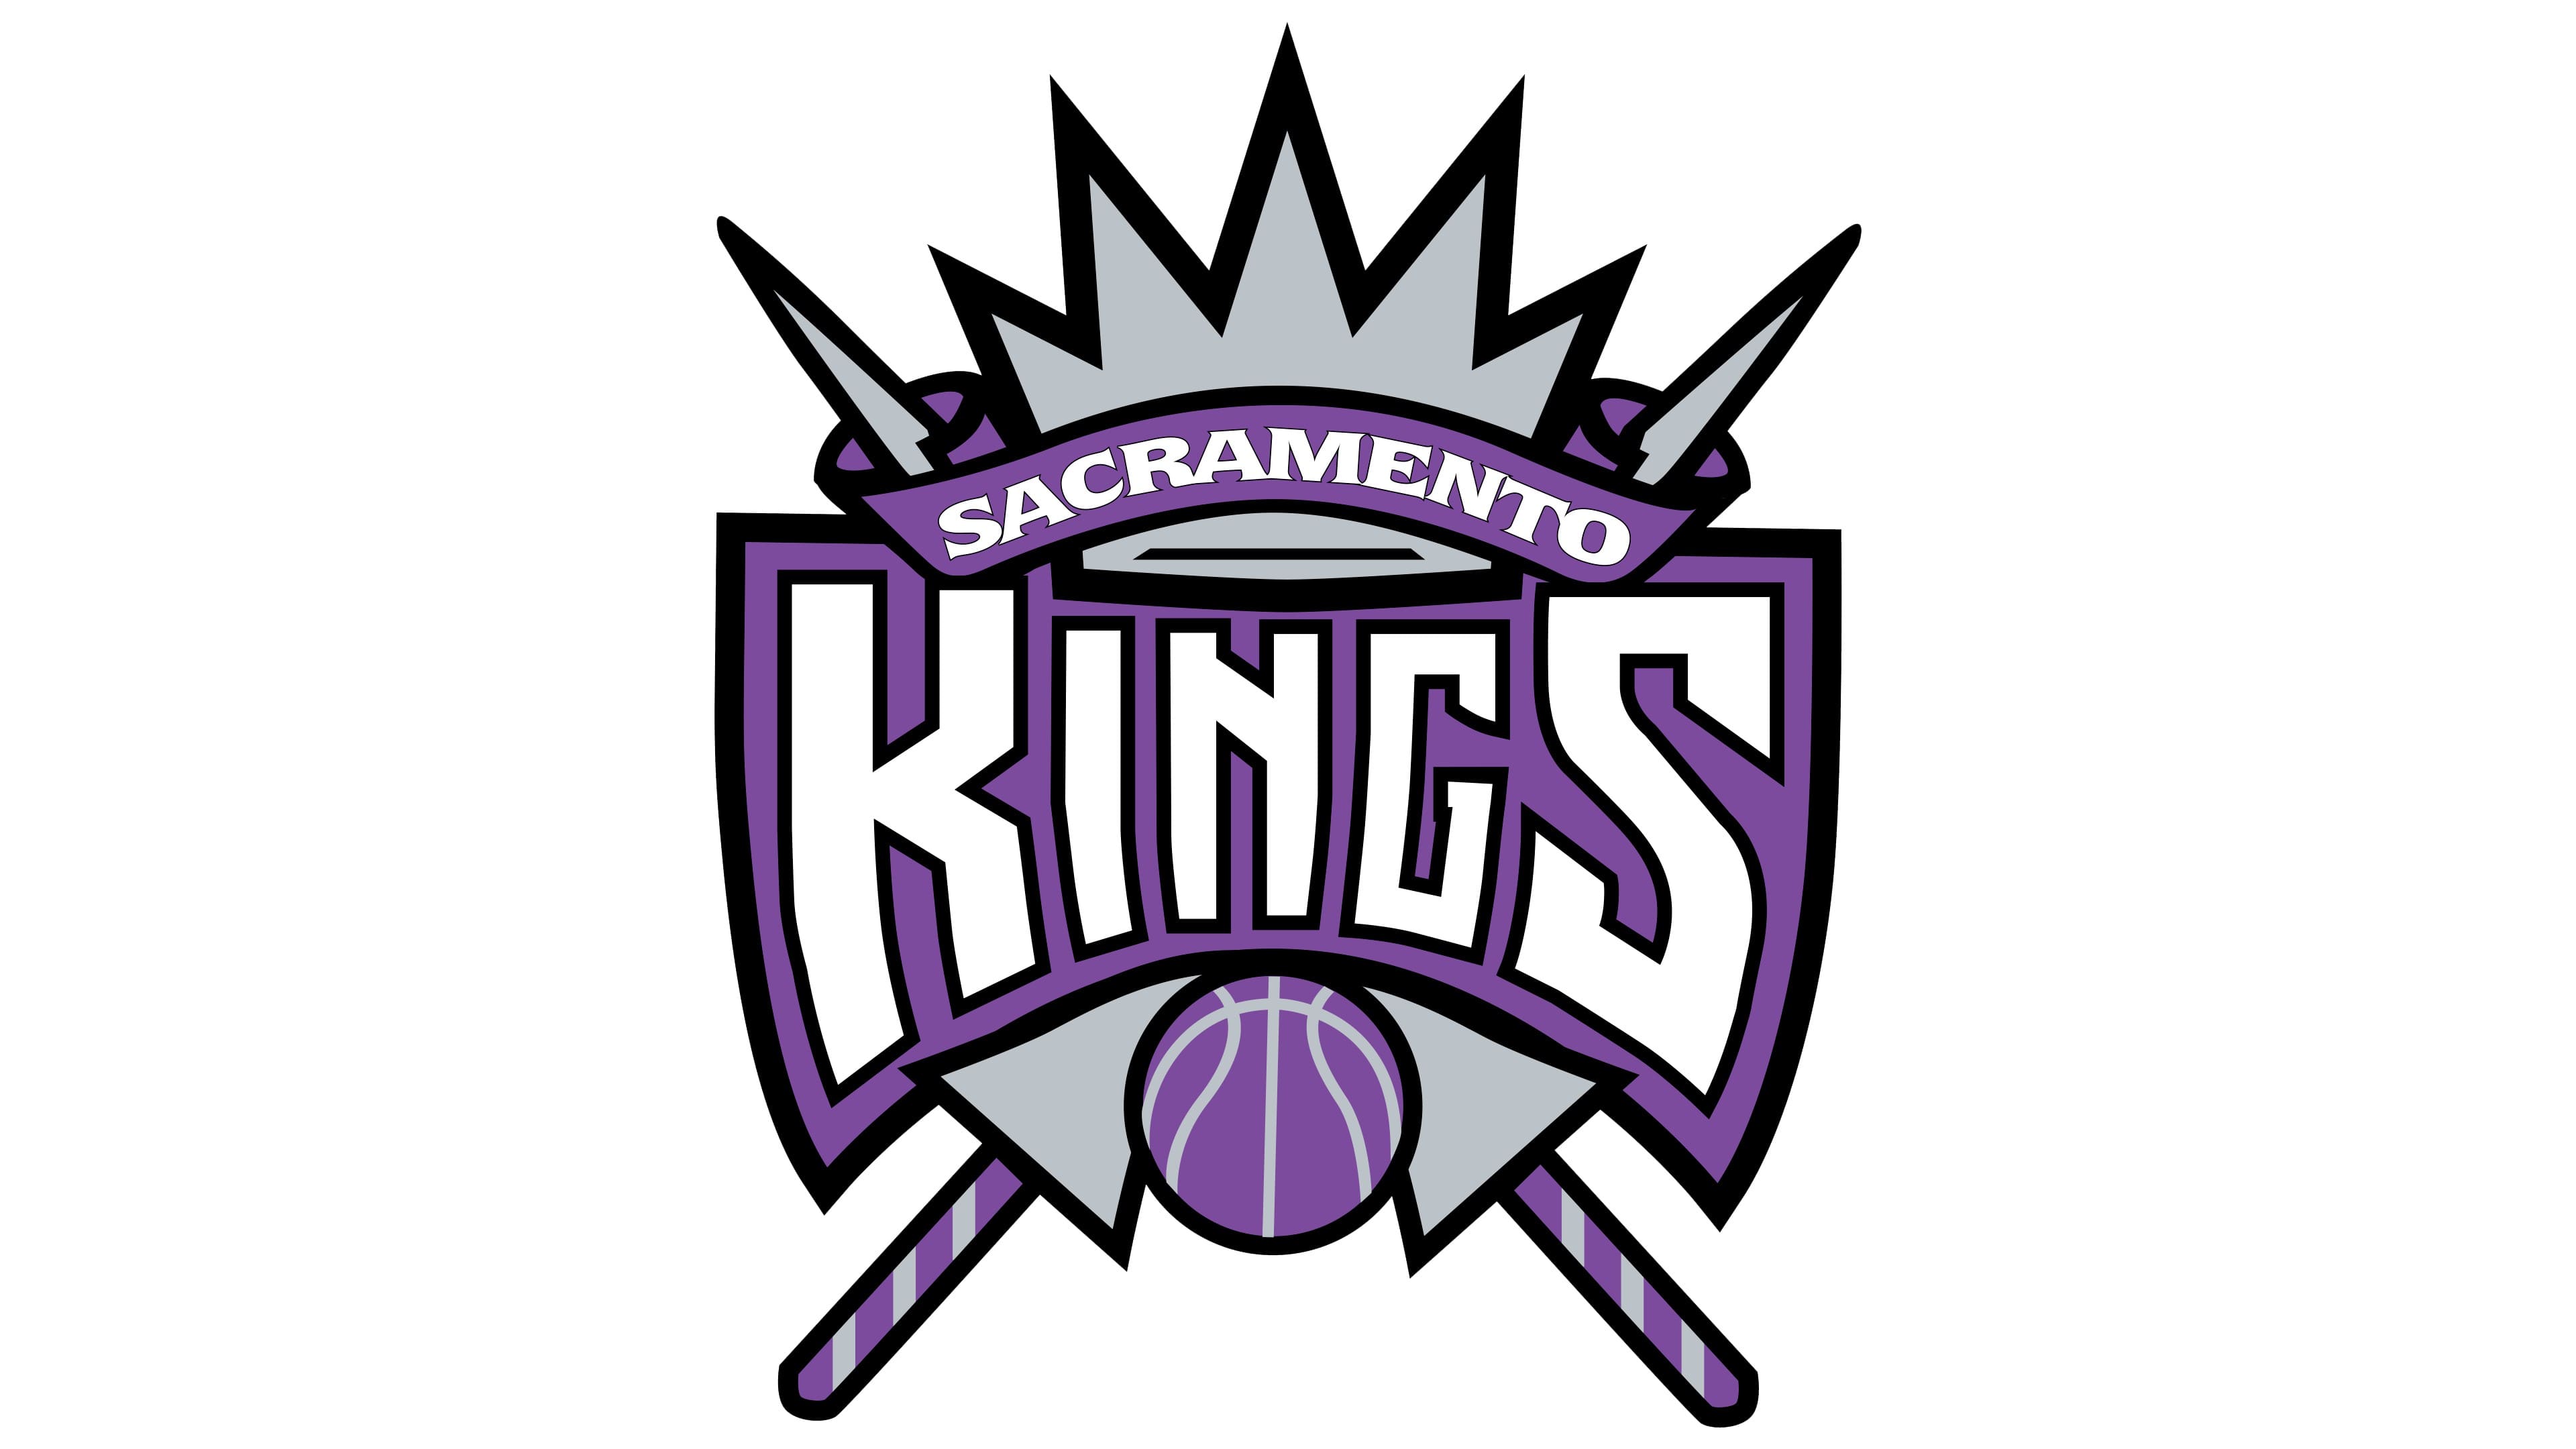 Sacramento Kings Logo and symbol, meaning, history, PNG, brand